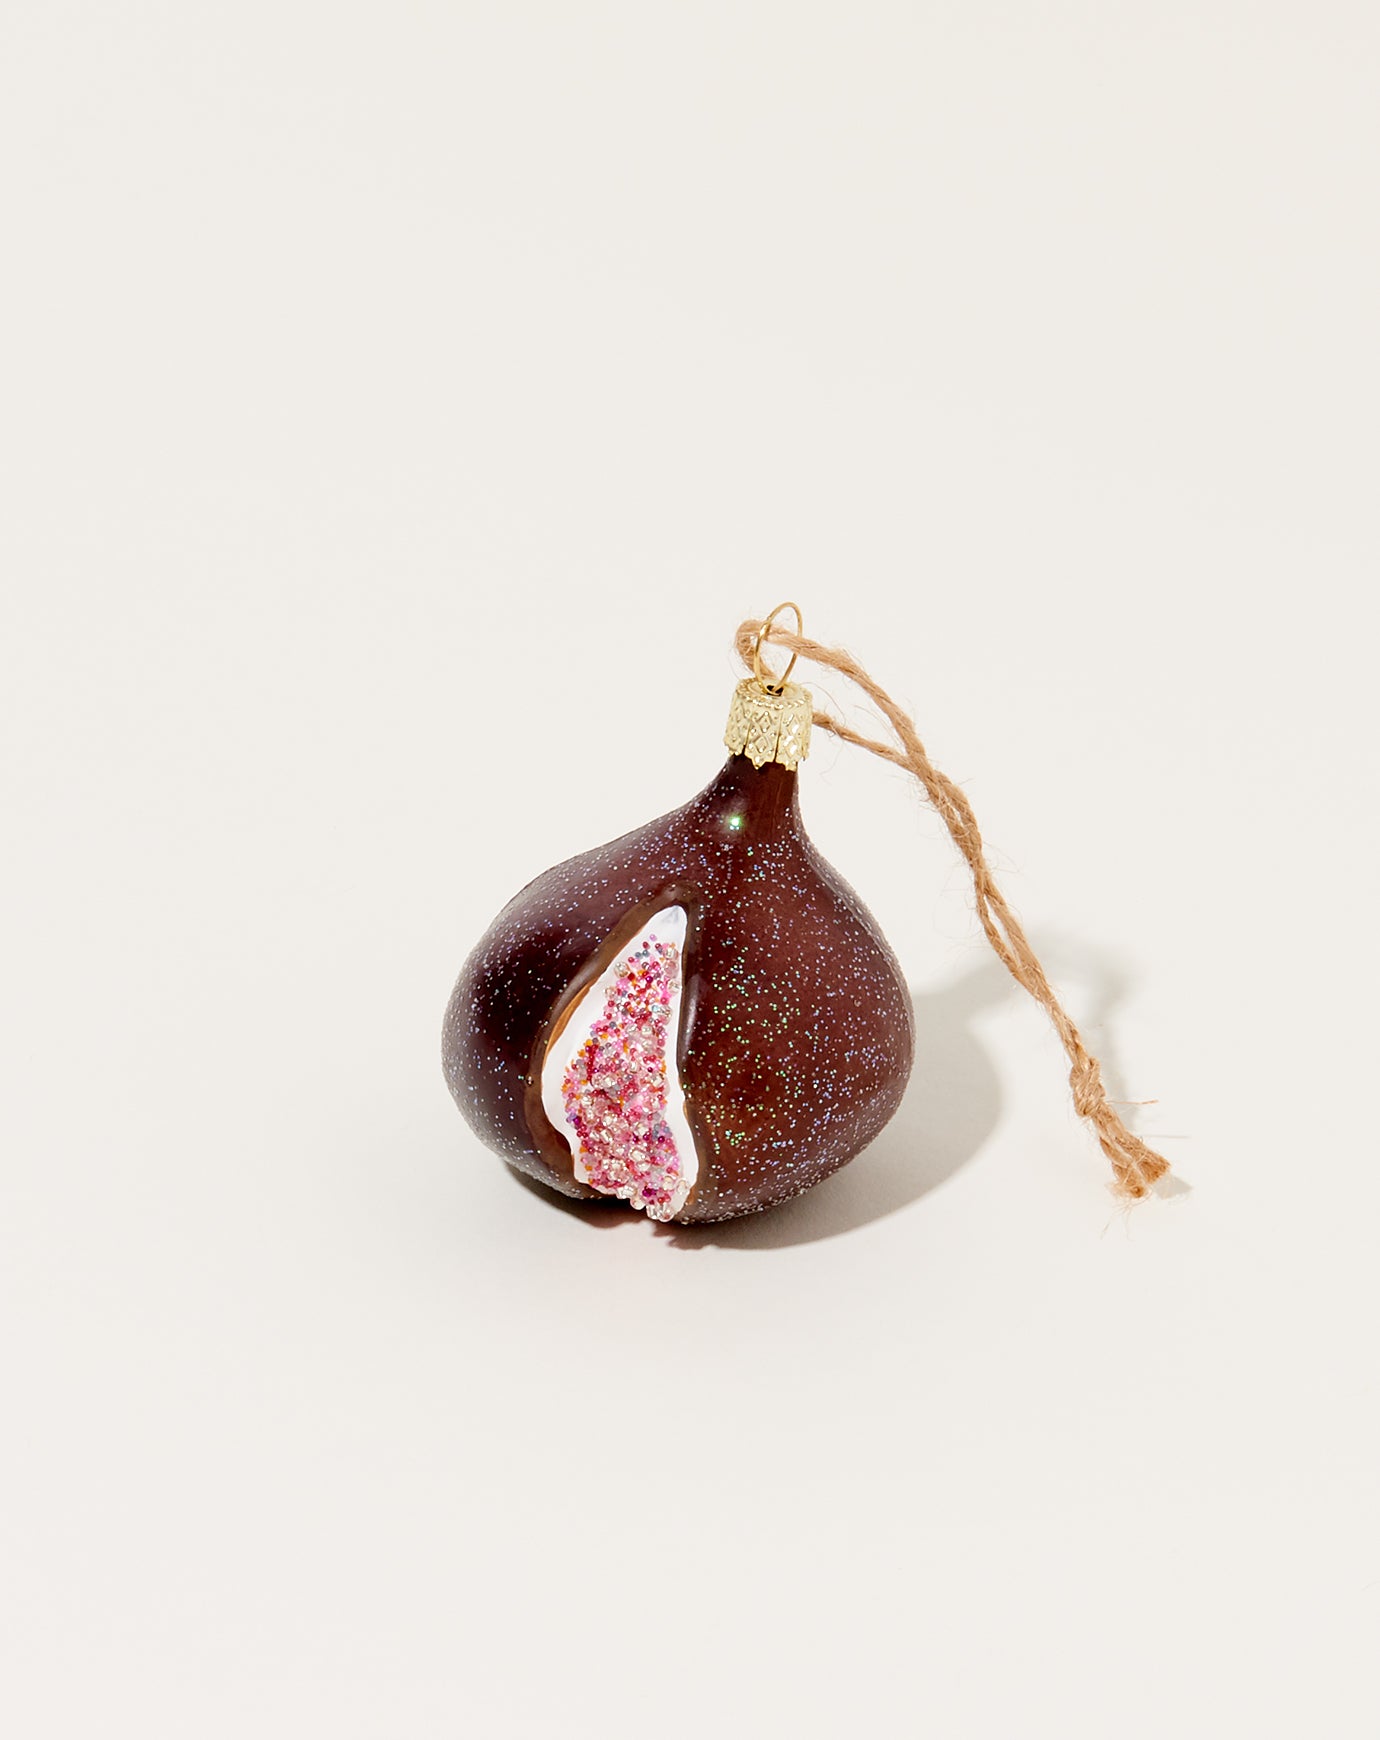 Cody Foster Orchard Fig Ornament in Brown